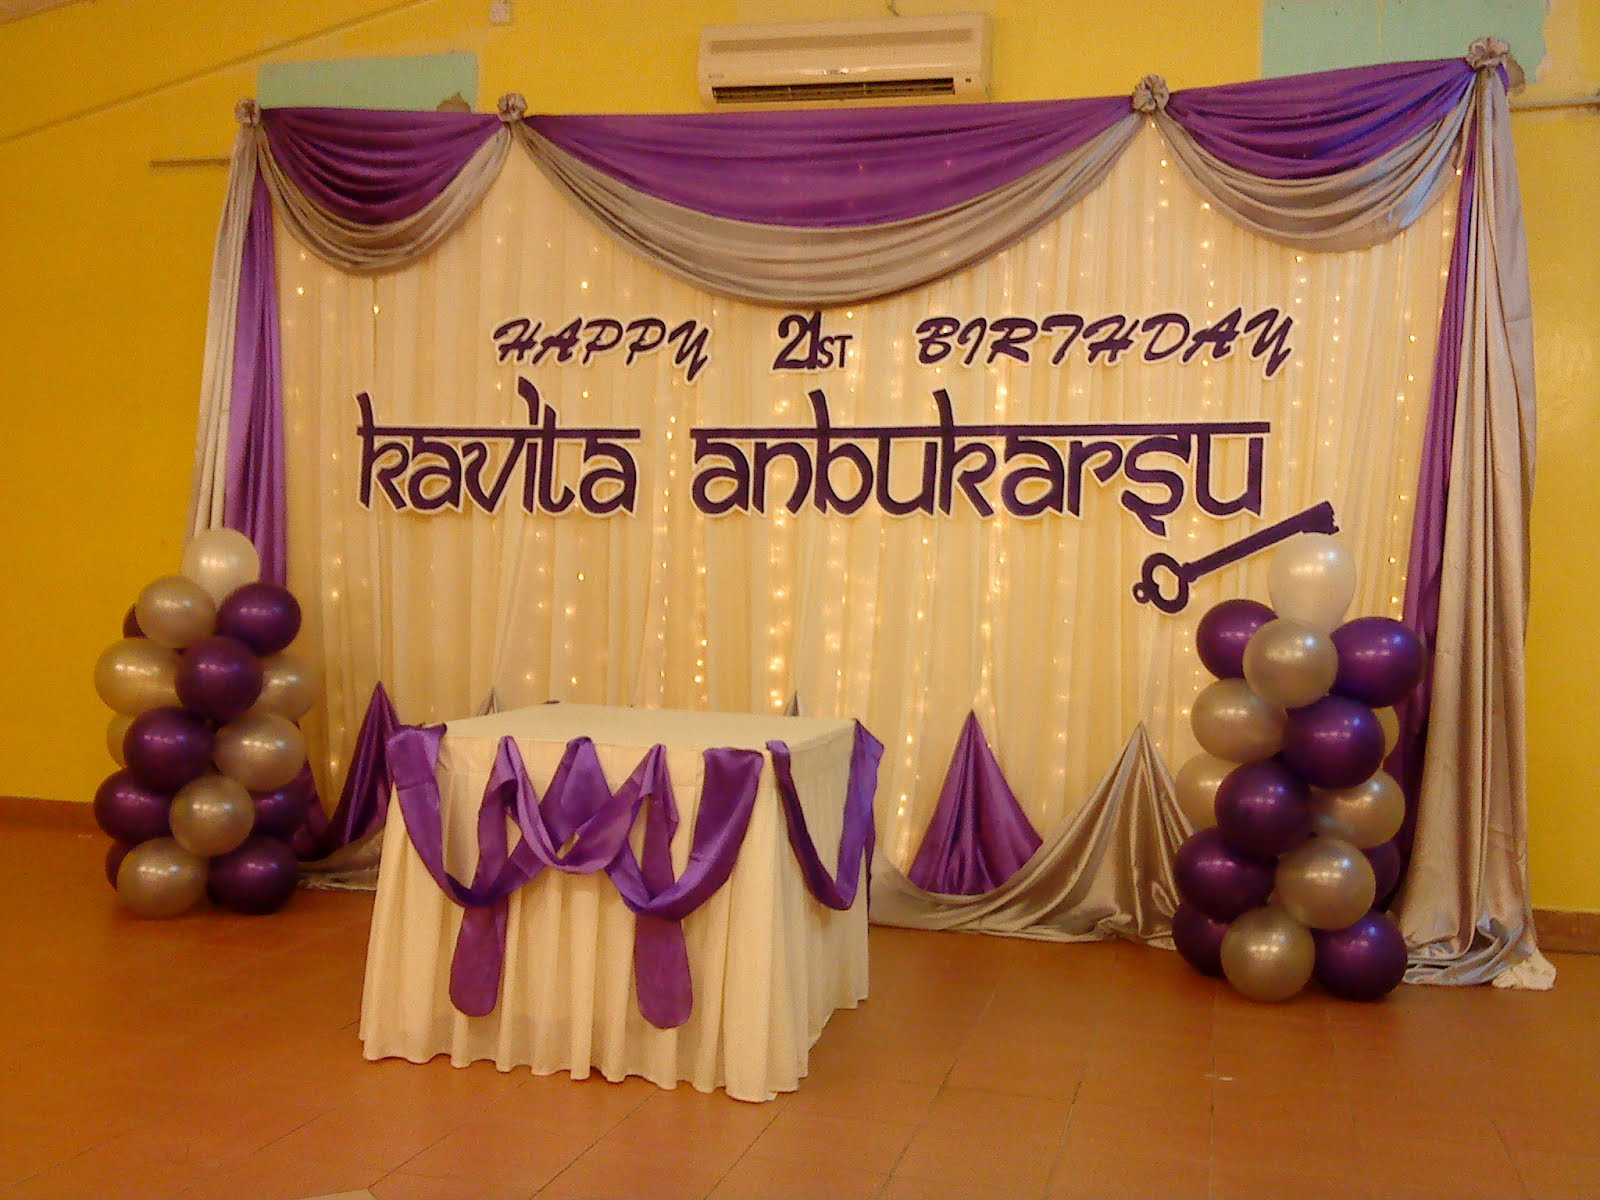 21st Birthday Party Decorations
 Raags Management Services 21st Birthday Deco purple & white